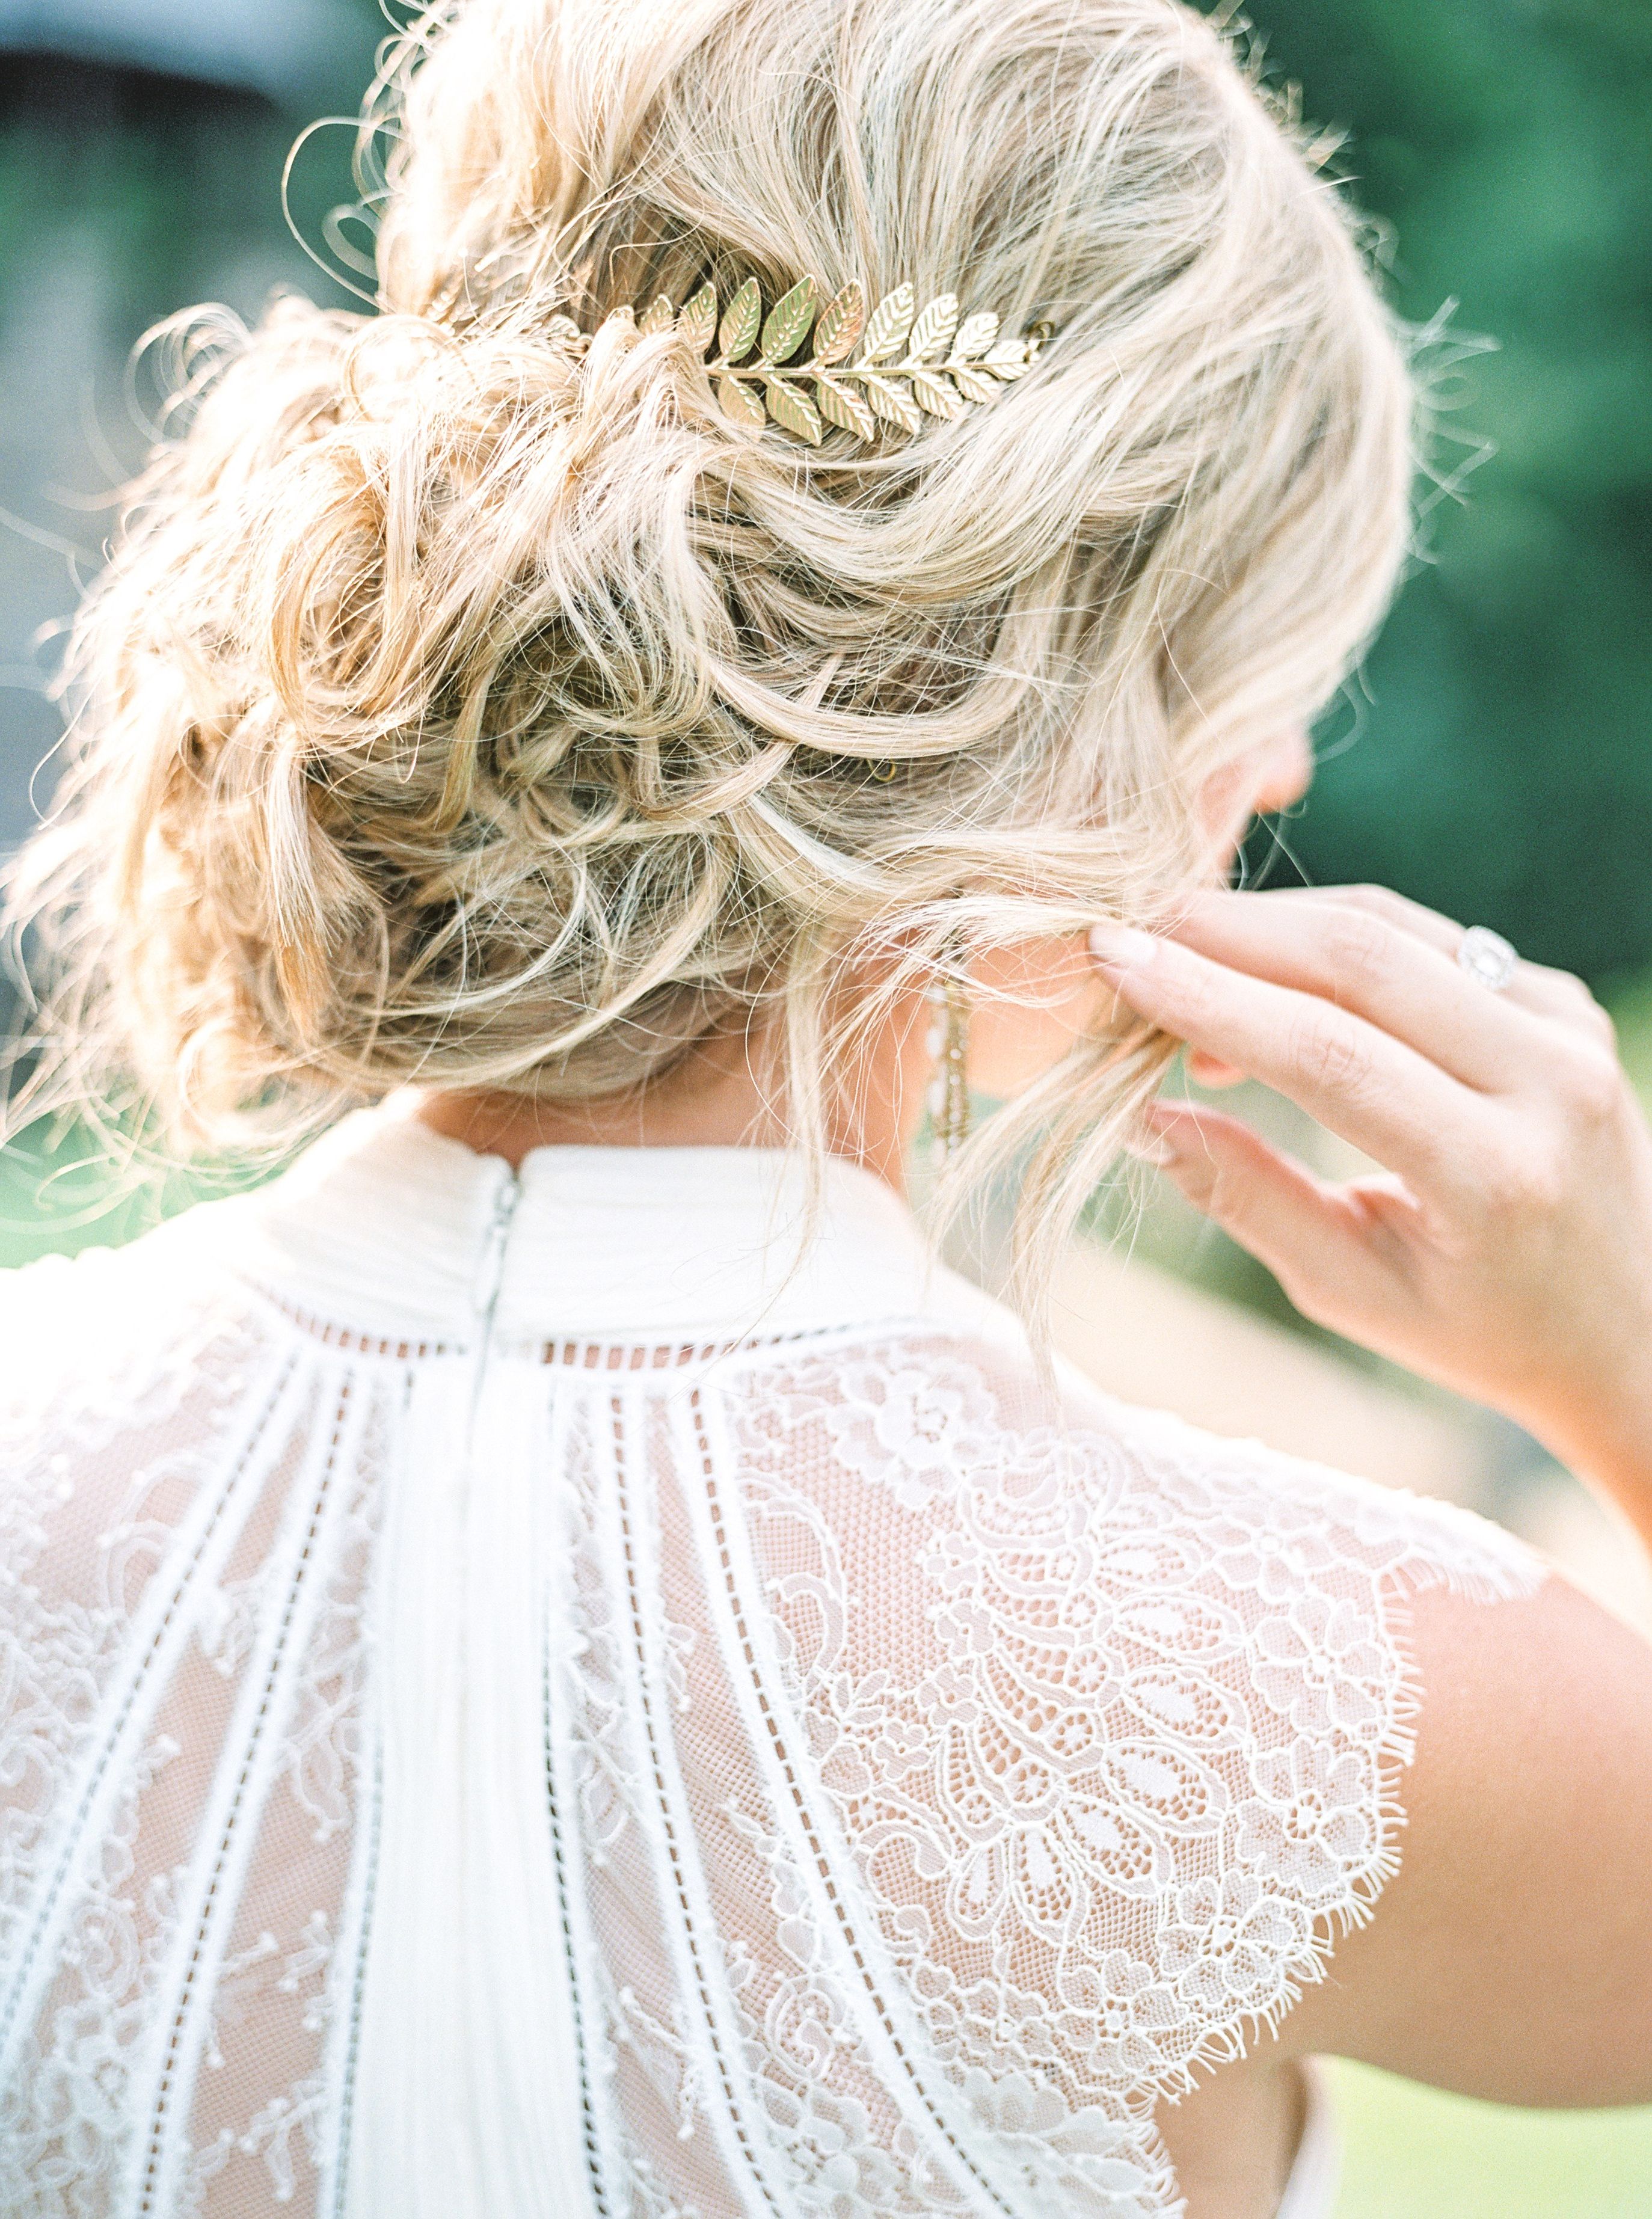 2017 Accessorized Undone Waves Bridal Hairstyles With Regard To 5 Bohemian Wedding Hairstyle Ideas And Accessories We're Totally (View 16 of 20)